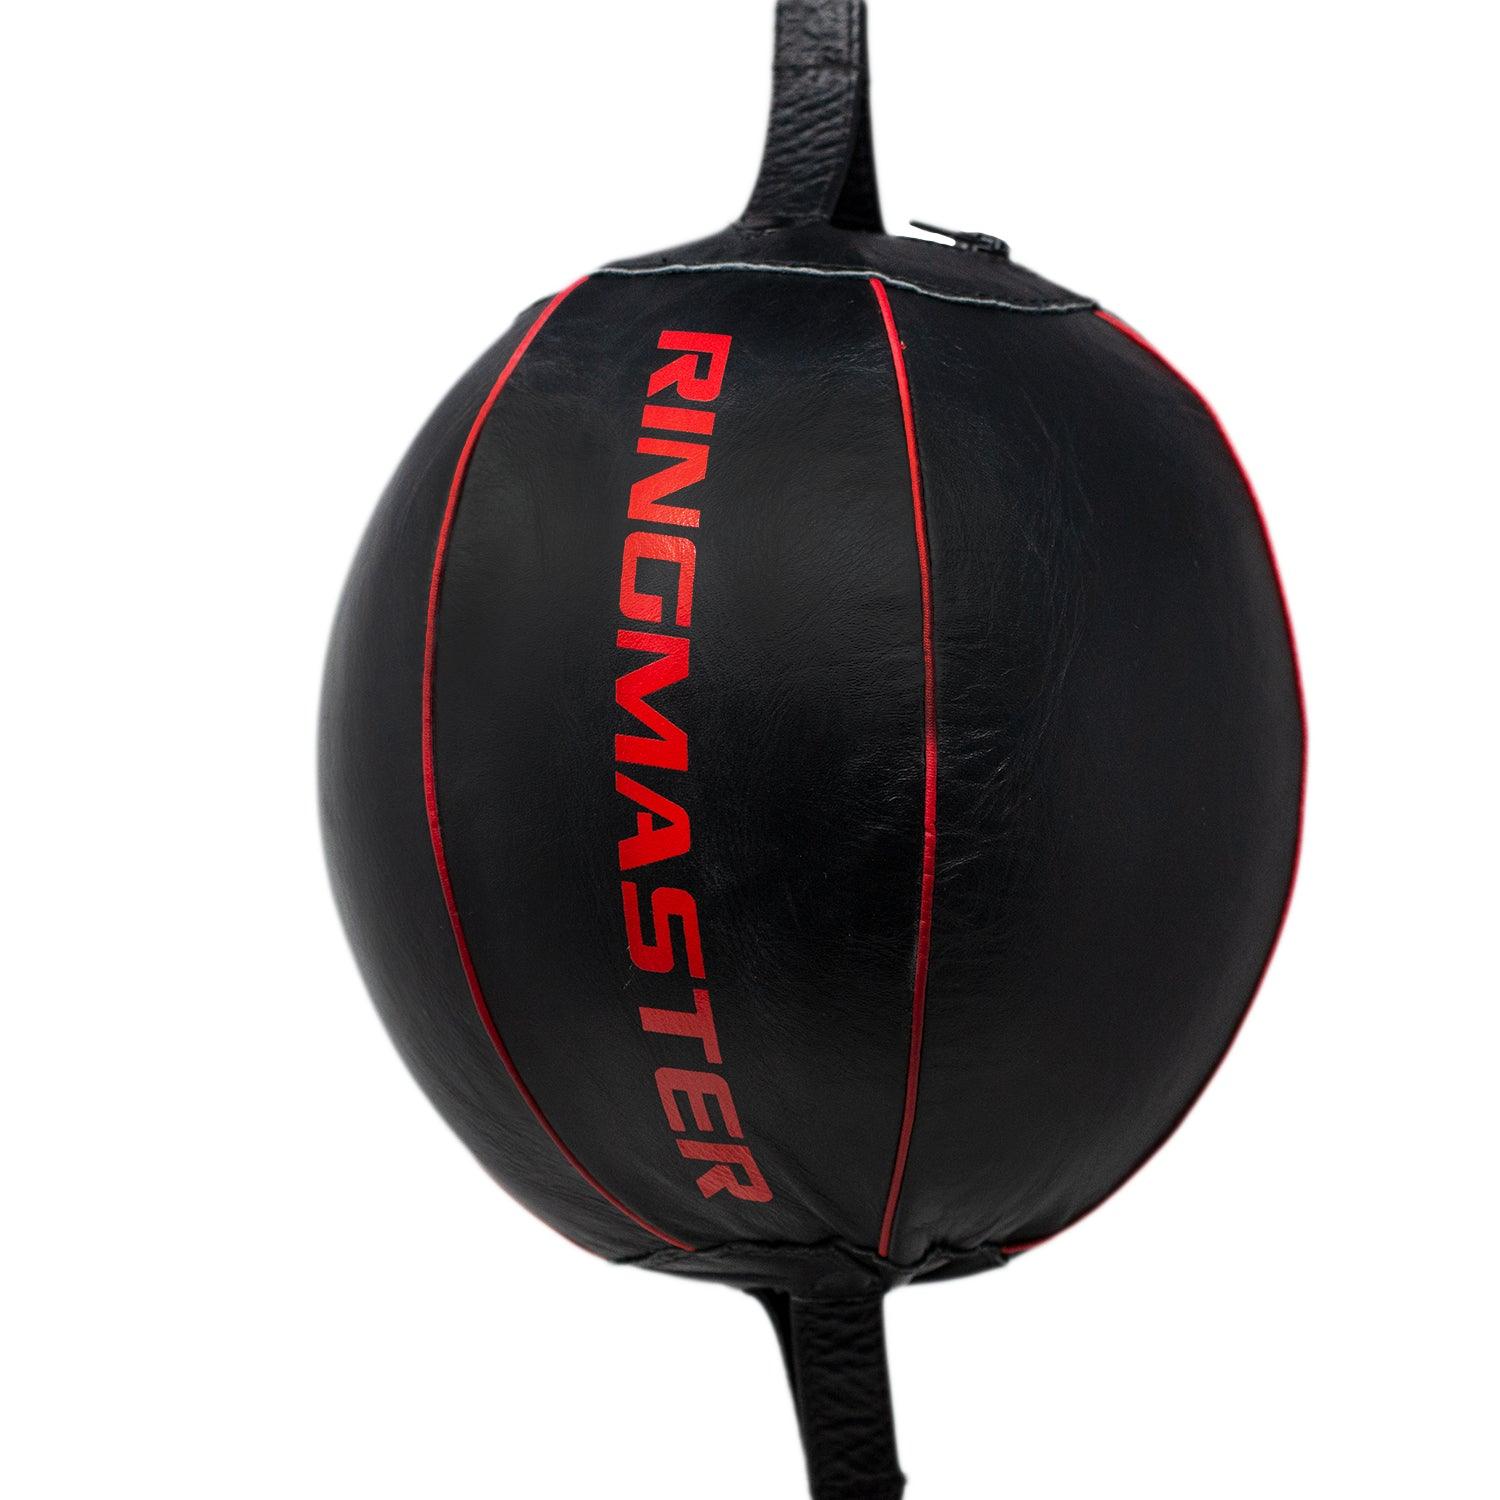 RingMaster Sports Double End Round Speed Ball Champion Series Genuine Leather Red/Black - RINGMASTER SPORTS - Made For Champions